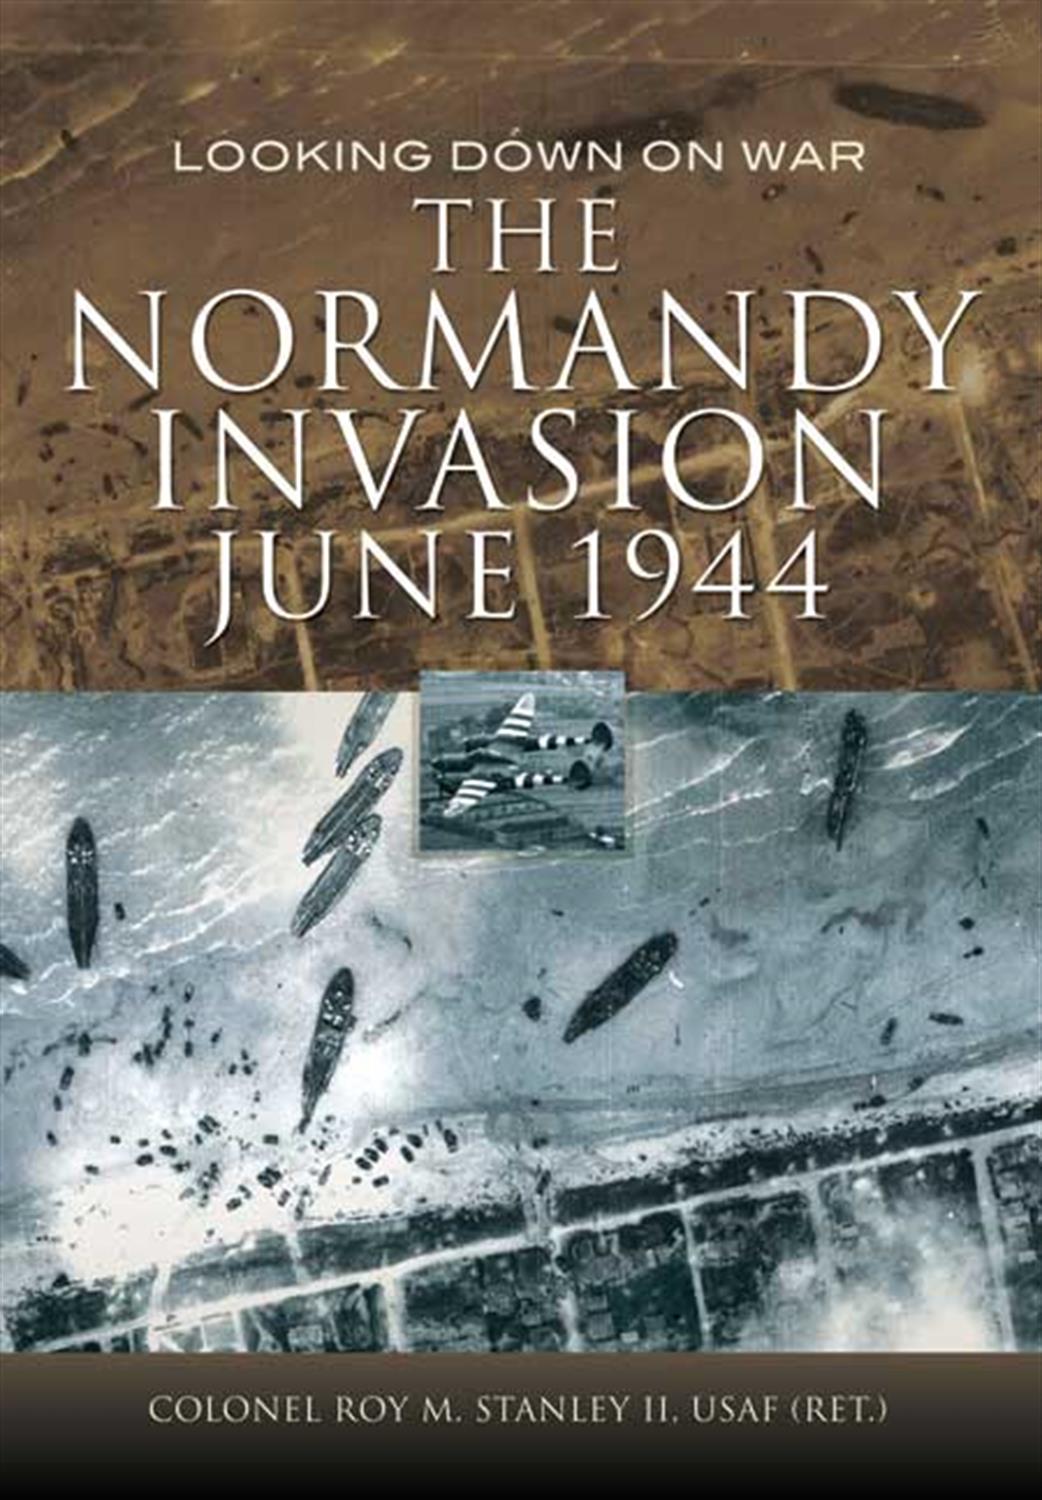 Pen & Sword  9781781590560 The Normandy Invasion June 1944 by Col. R.M.Stanley II, USAF (Ret.)